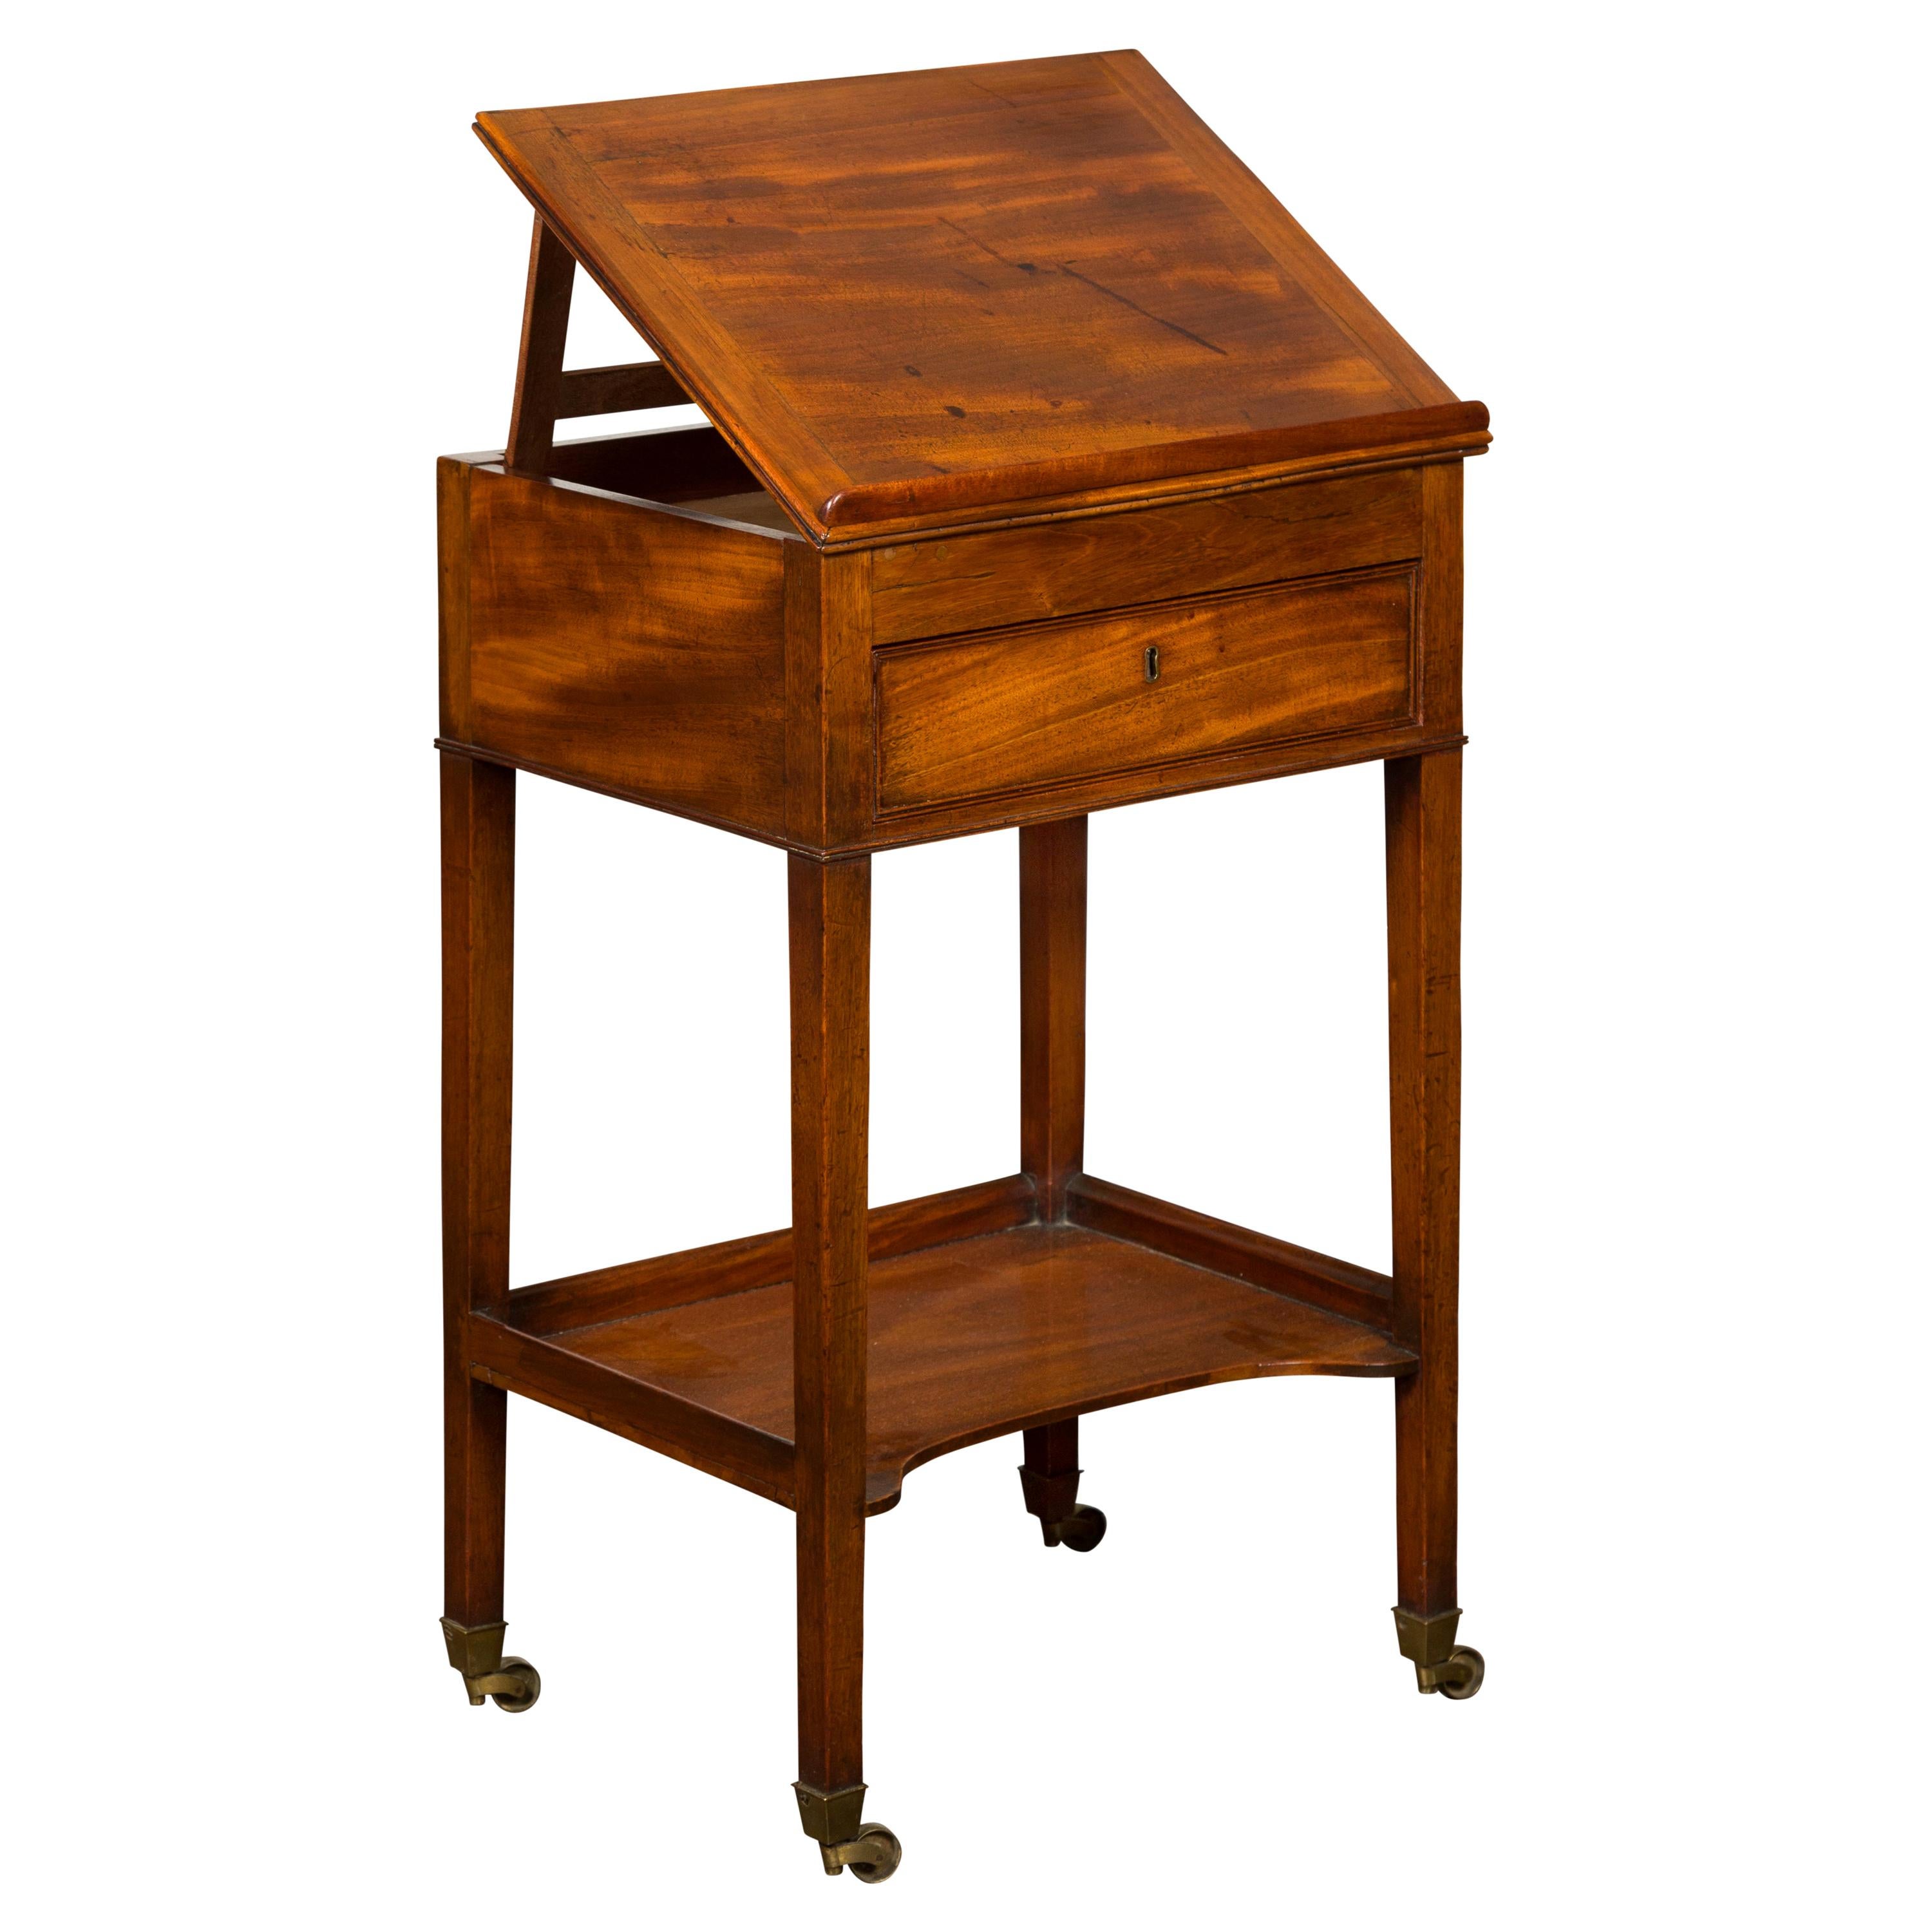 English 1820s Mahogany Architect's Table with Tilt Top, Single Drawer and Shelf